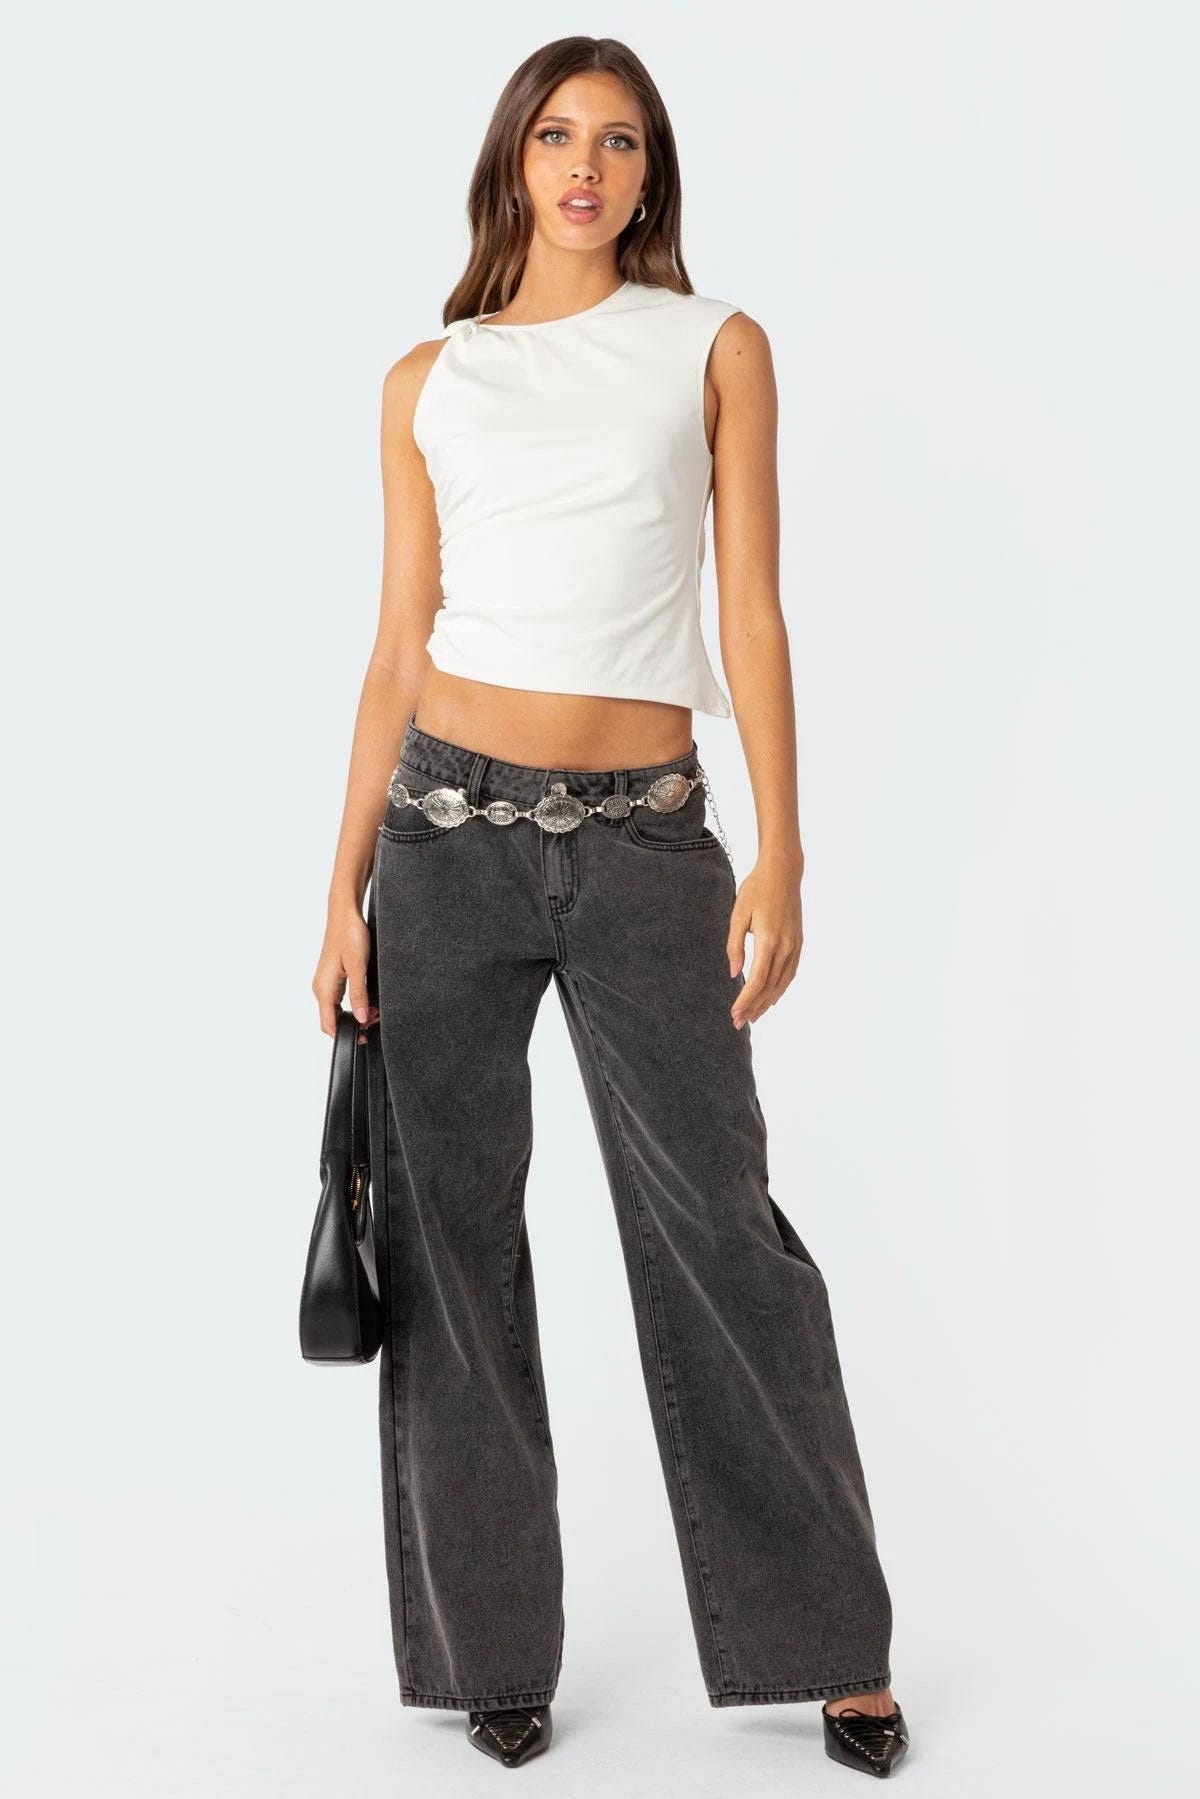 Washed Low-Rise Black Jeans for Stylish Comfort | Image